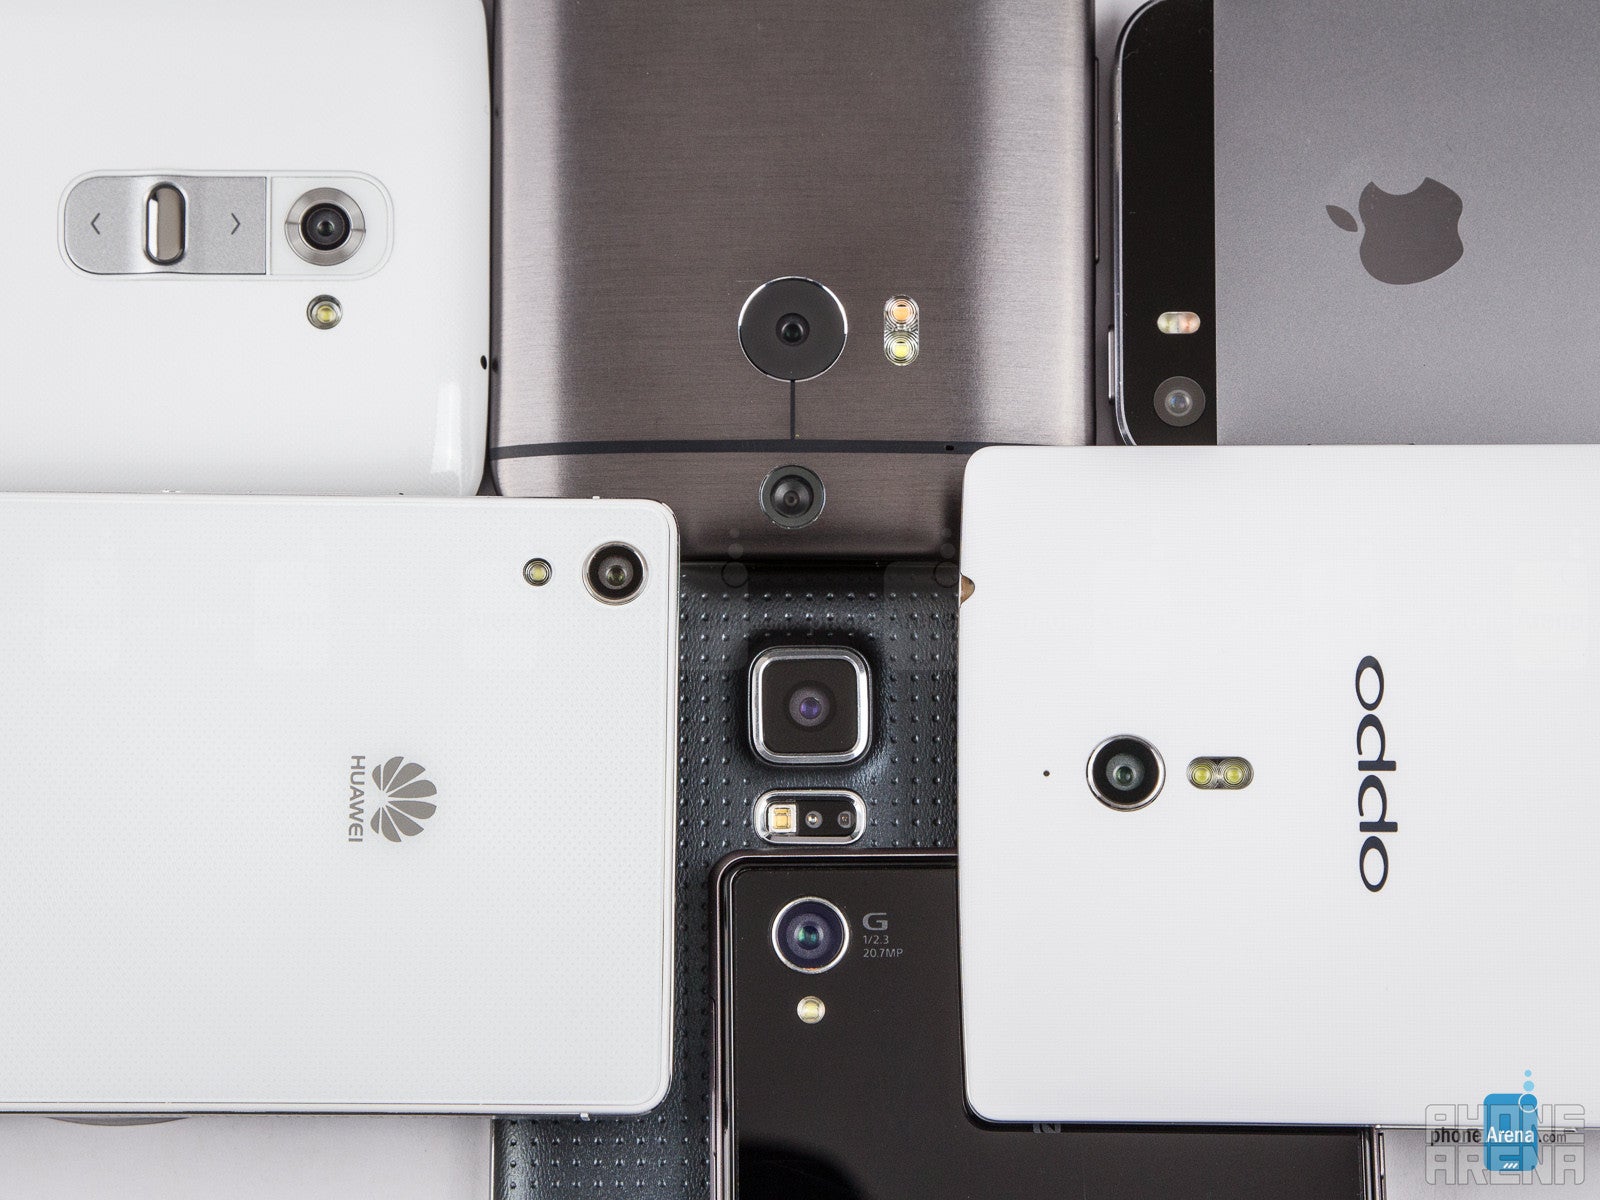 Camera comparison: Huawei Ascend P7 and Oppo Find 7a vs Samsung Galaxy S5, LG G2, iPhone 5s, HTC One (M8), Sony Xperia Z1